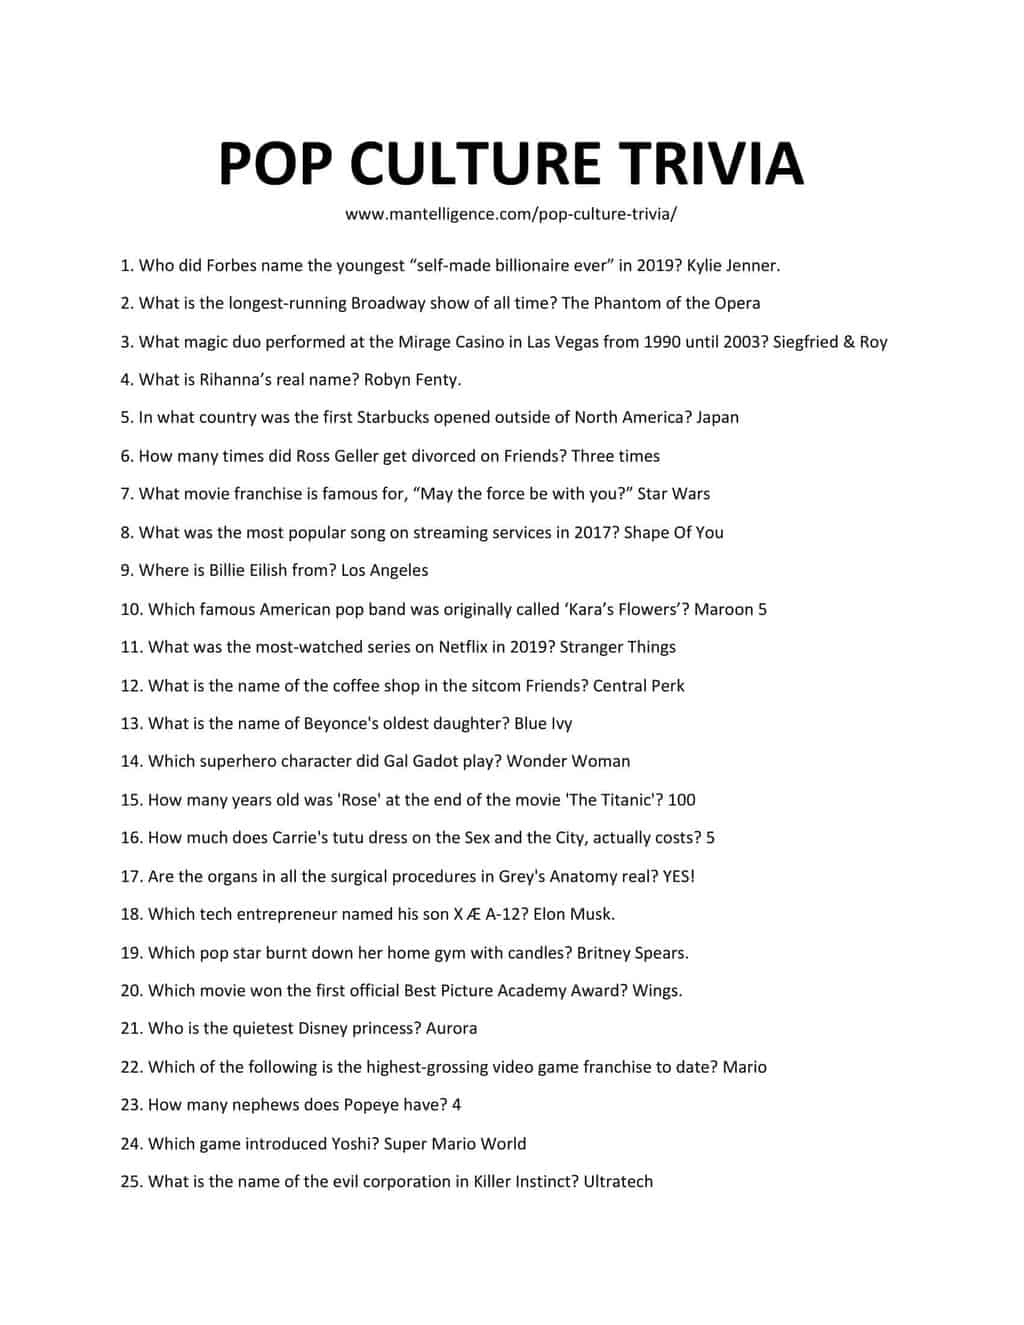 Trivia Challenge Questions And Answers